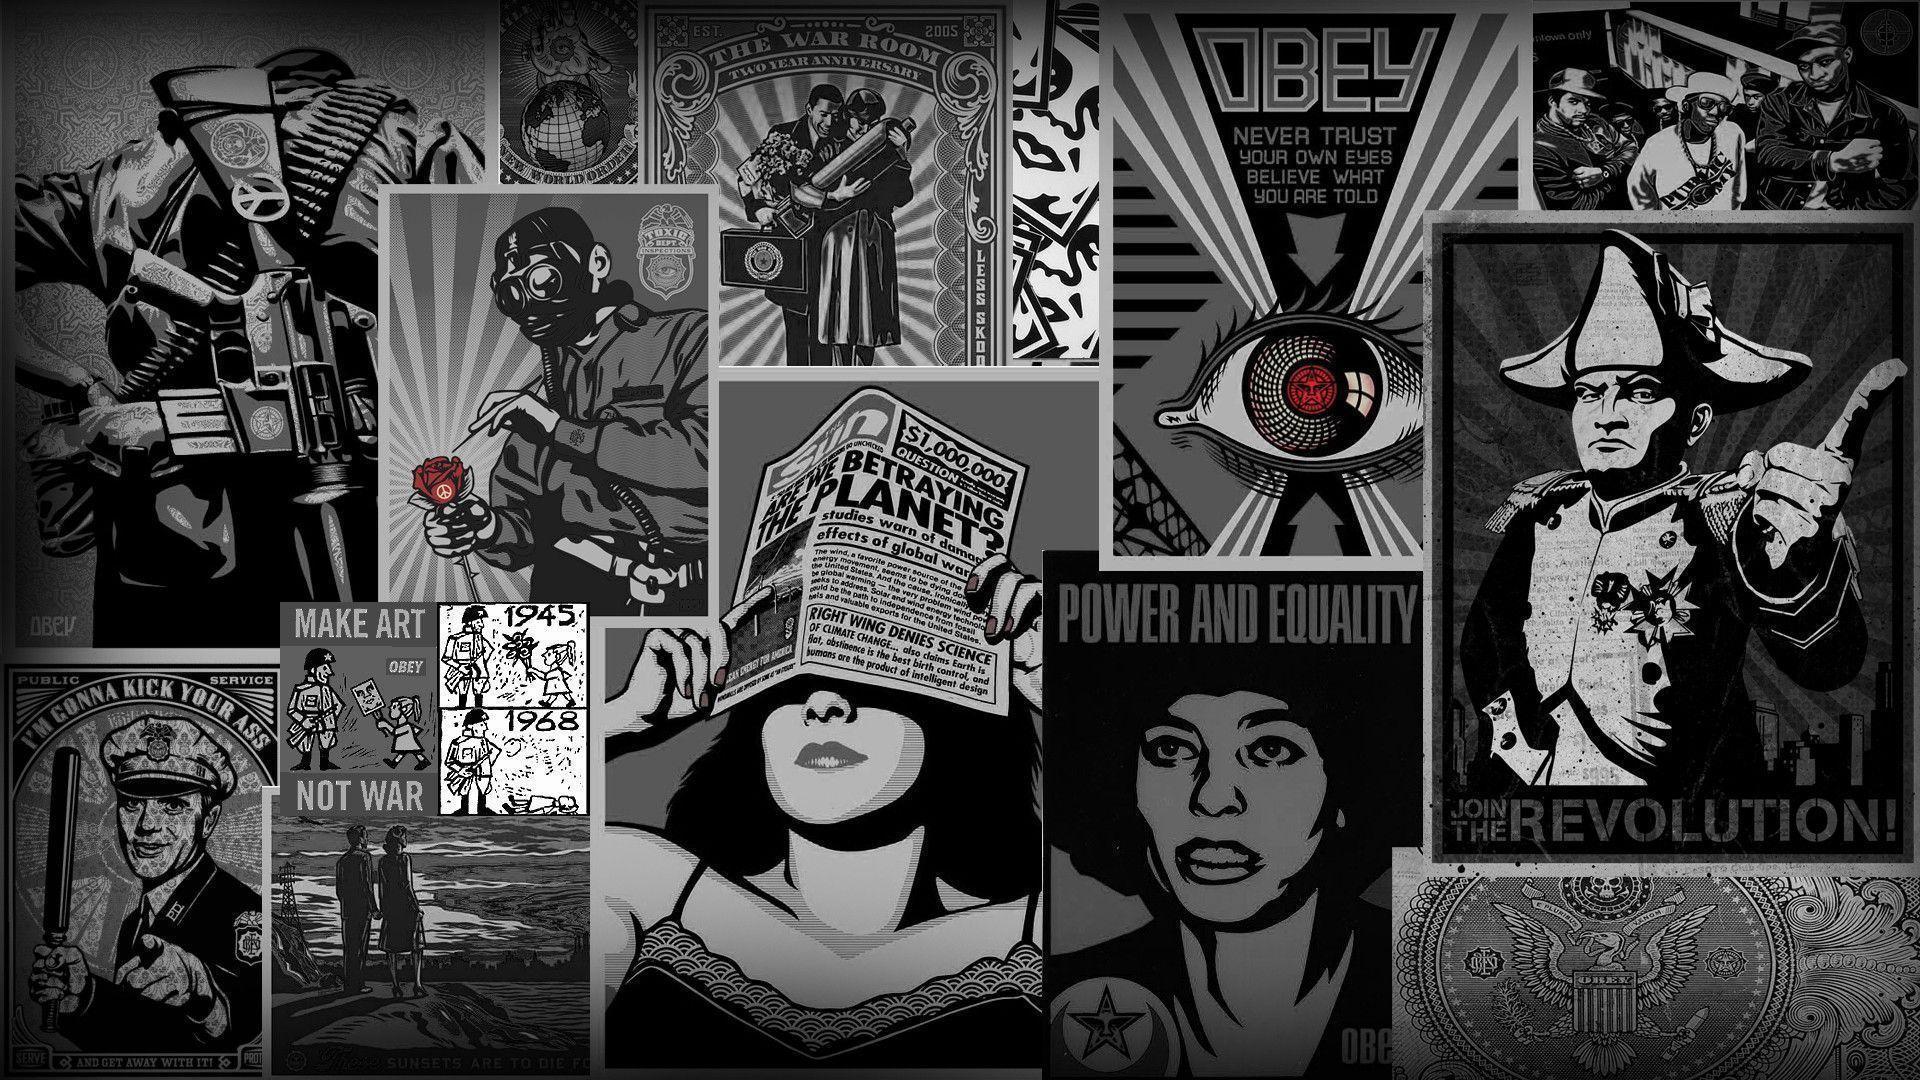 Obey Hd wallpapers